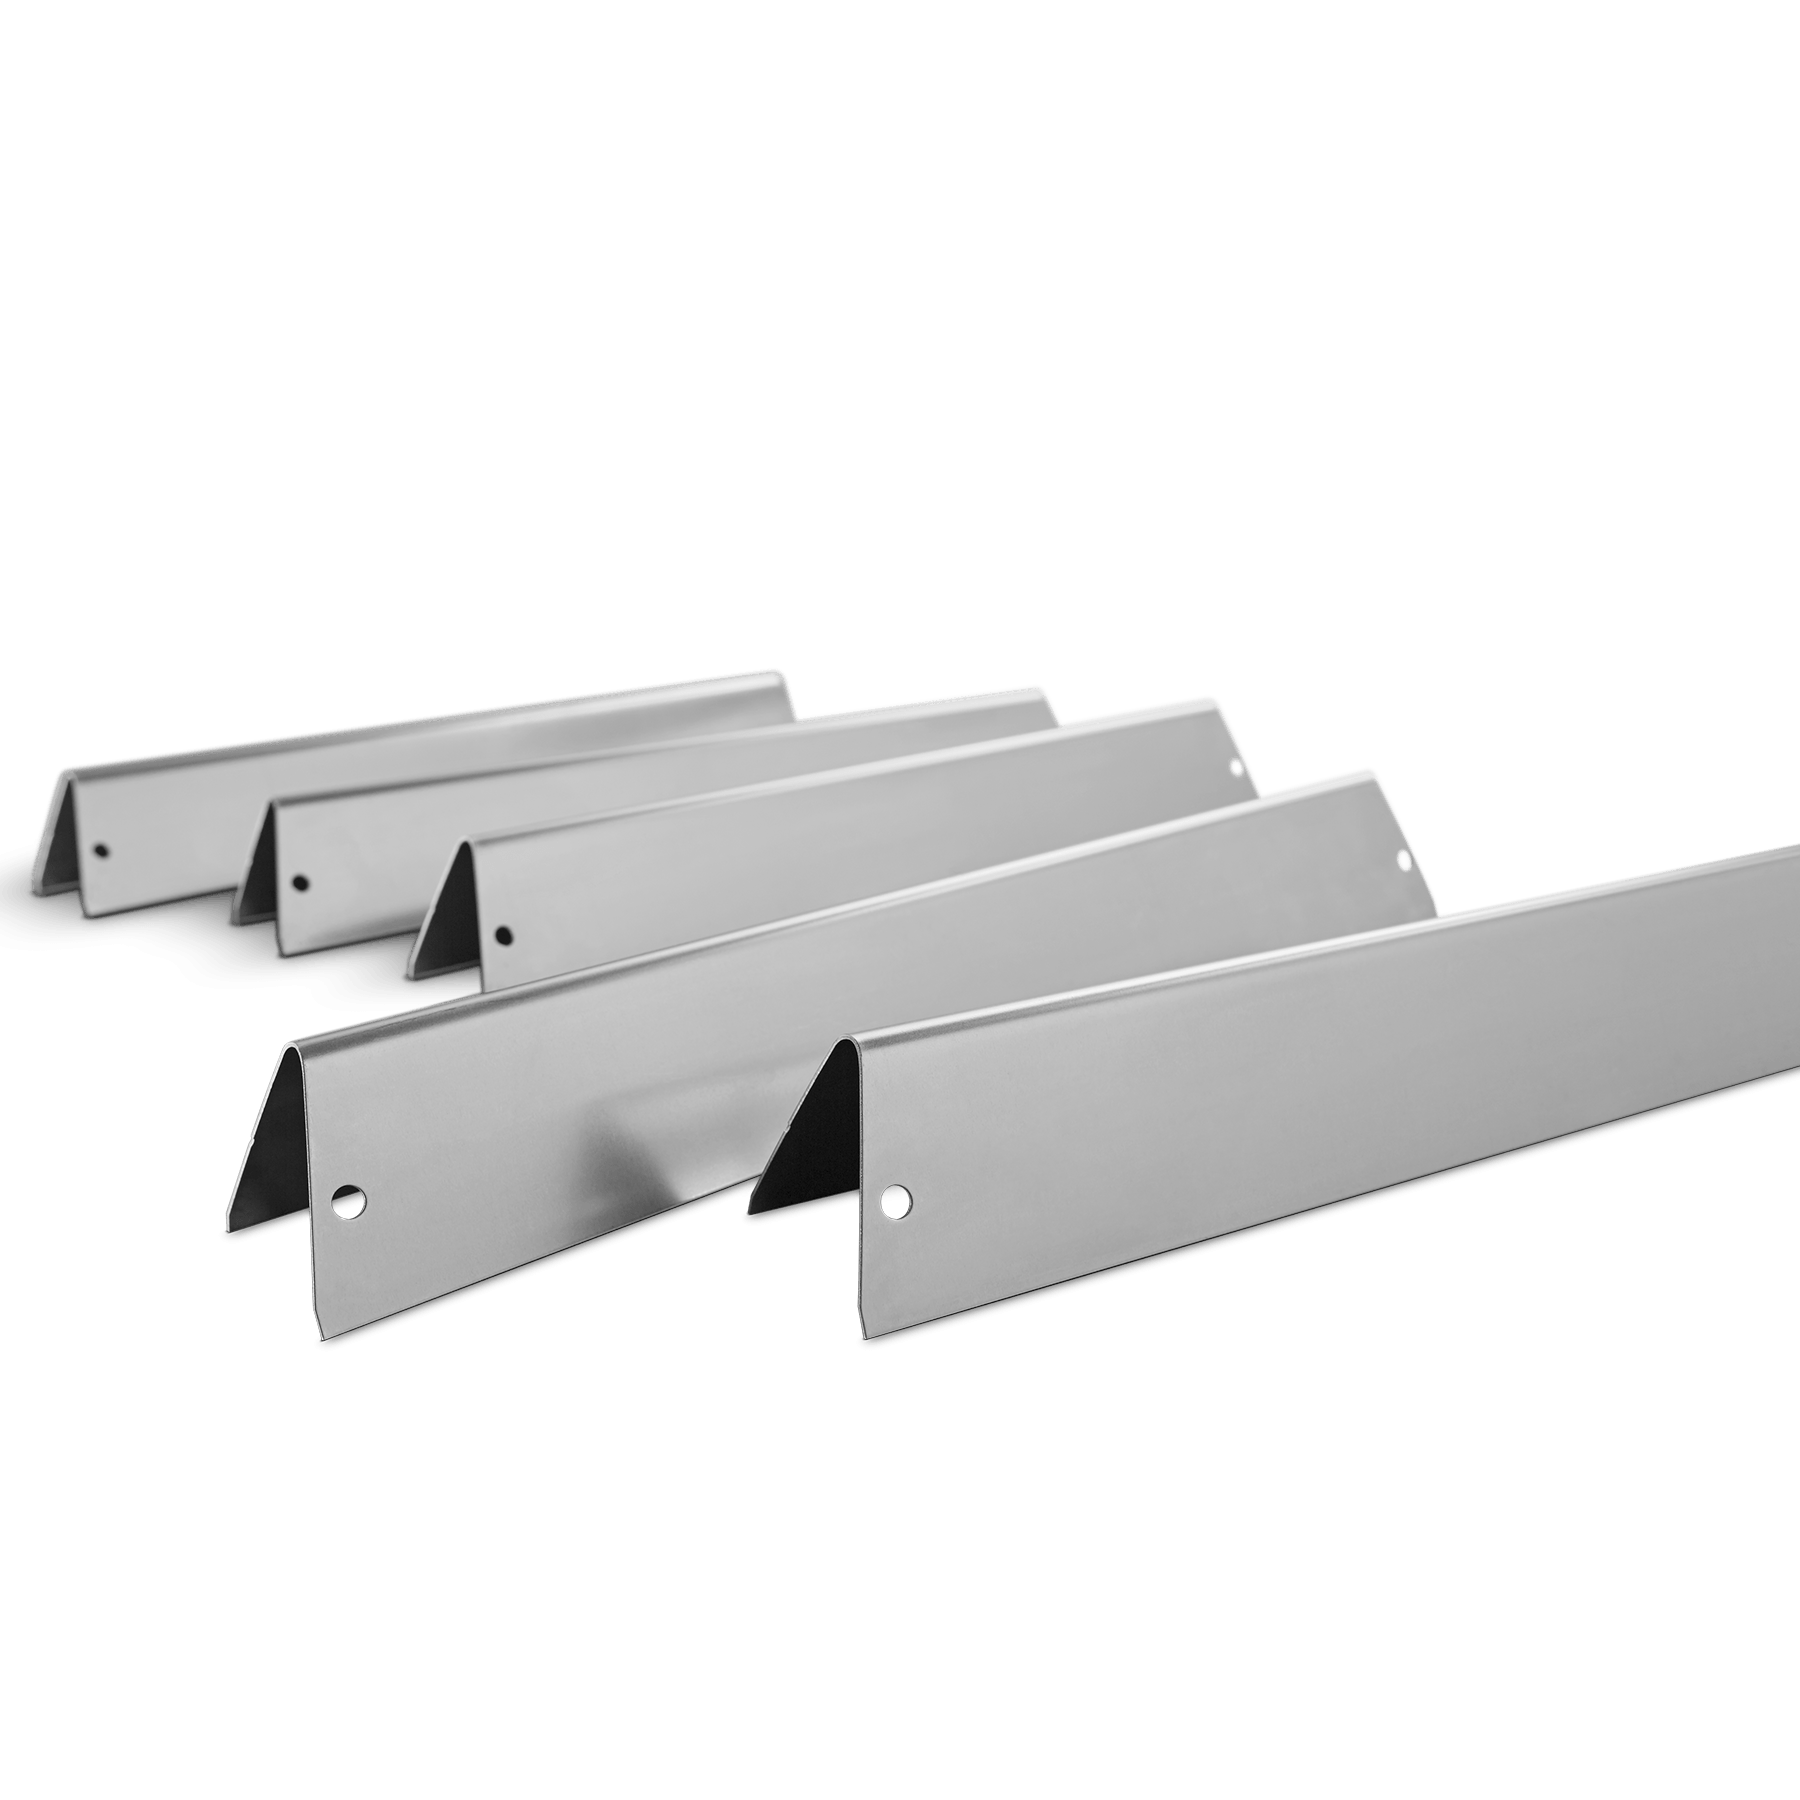 5 Stainless Steel Flavorizer Bars 24.5 inch for Weber Genesis BBQ Grill 7539 754 